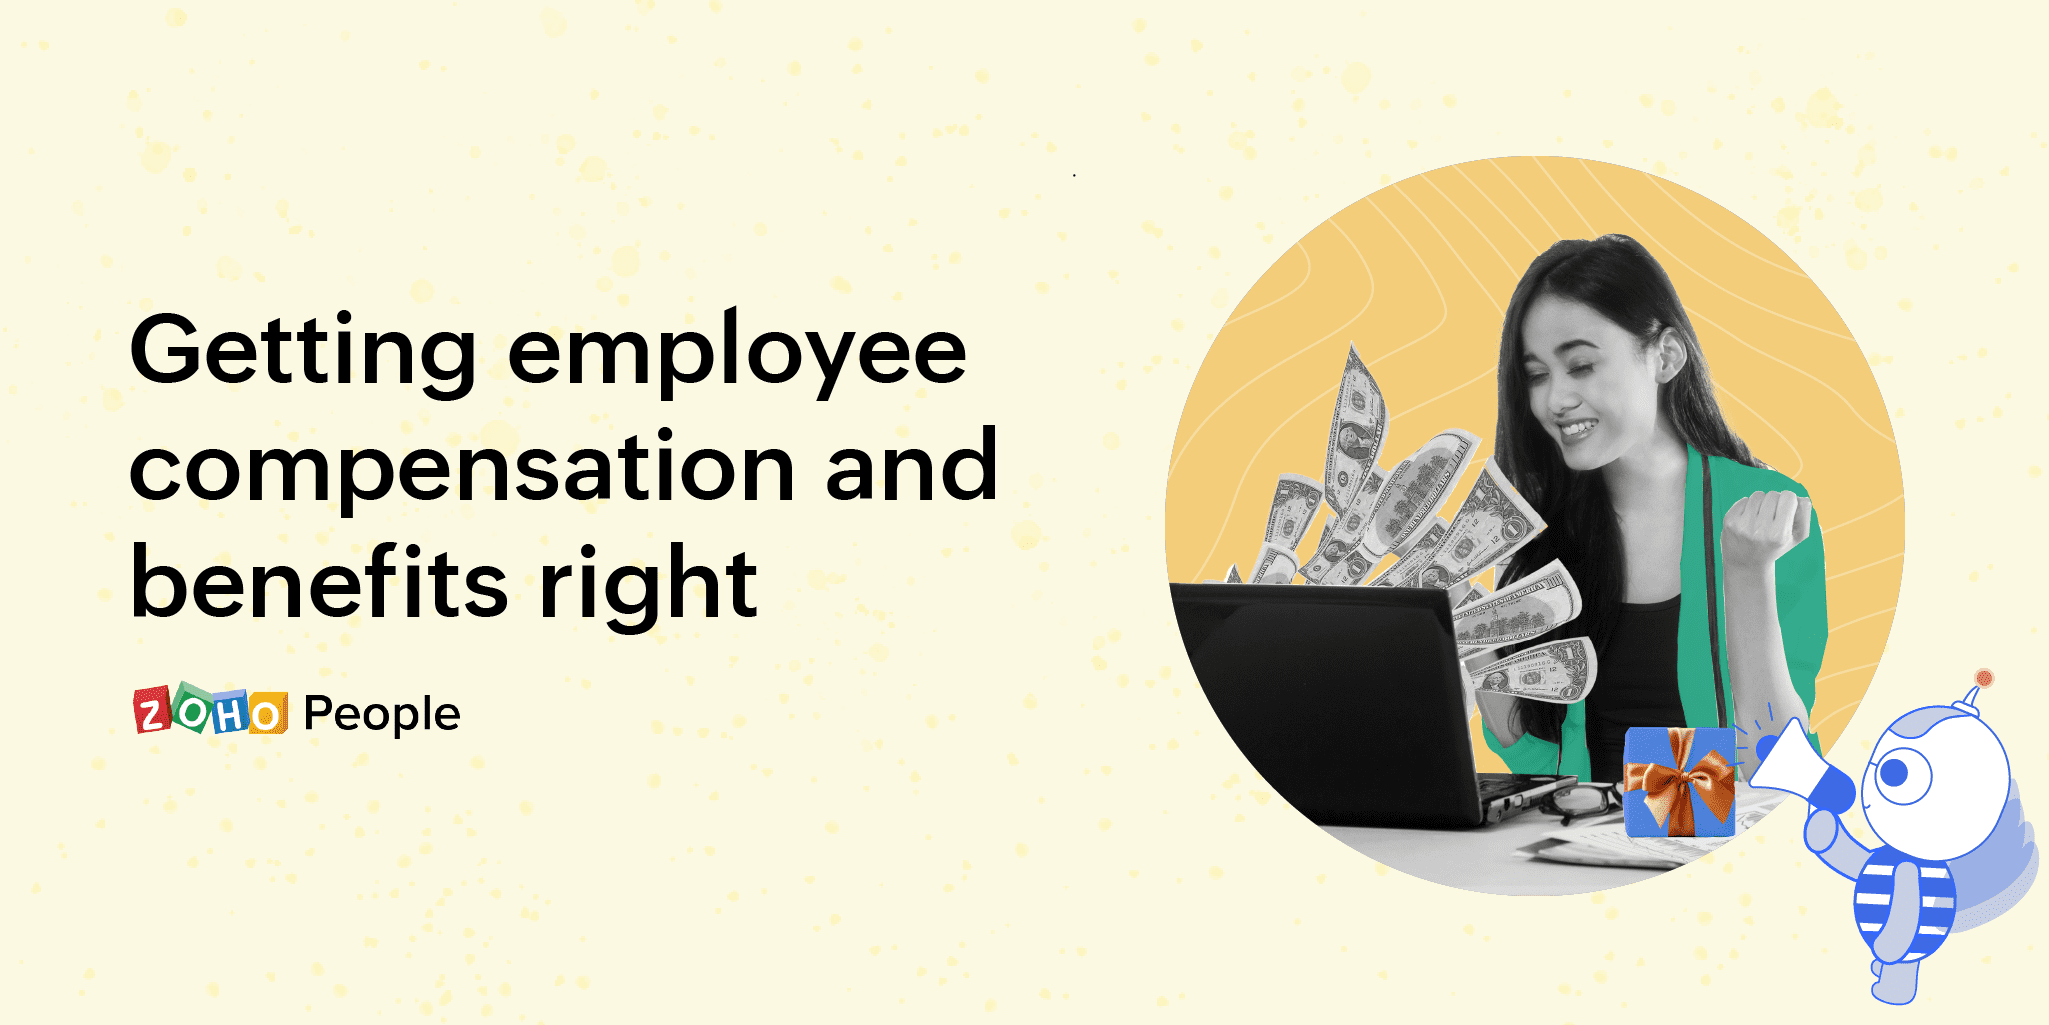 4 steps to getting employee compensation and benefits right